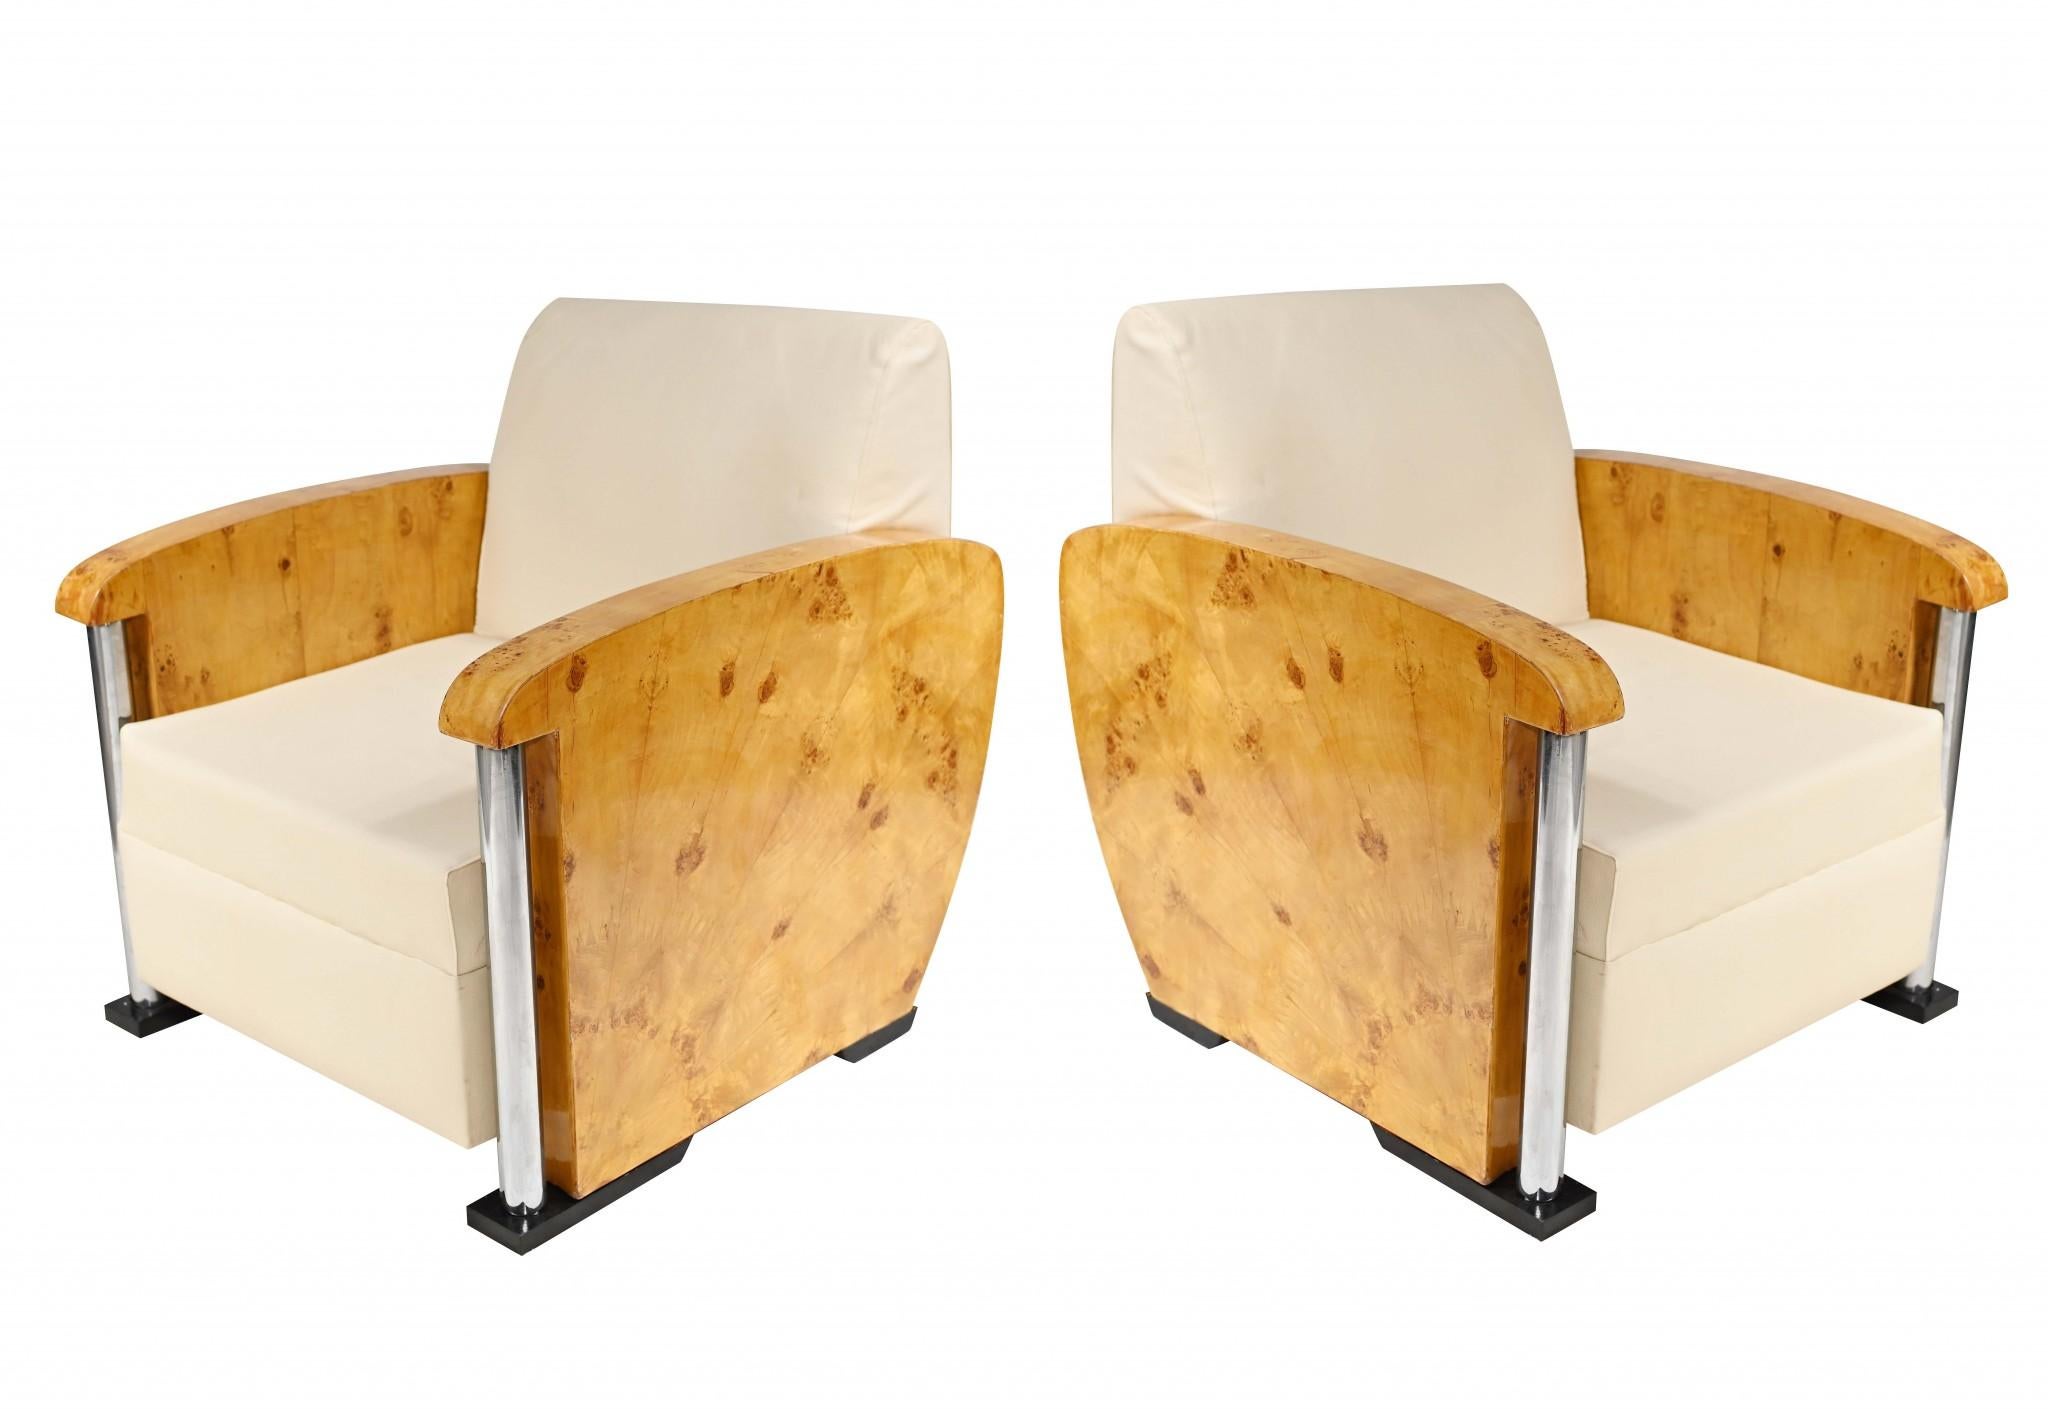 Stunning pair of art deco style club chairs with a unique box design
Classic minimal deco look somehow embodies the 1920s aesthetic
Perfect for contemporary interiors and comfortable to sit in
Offered in great shape ready for home use right away
We